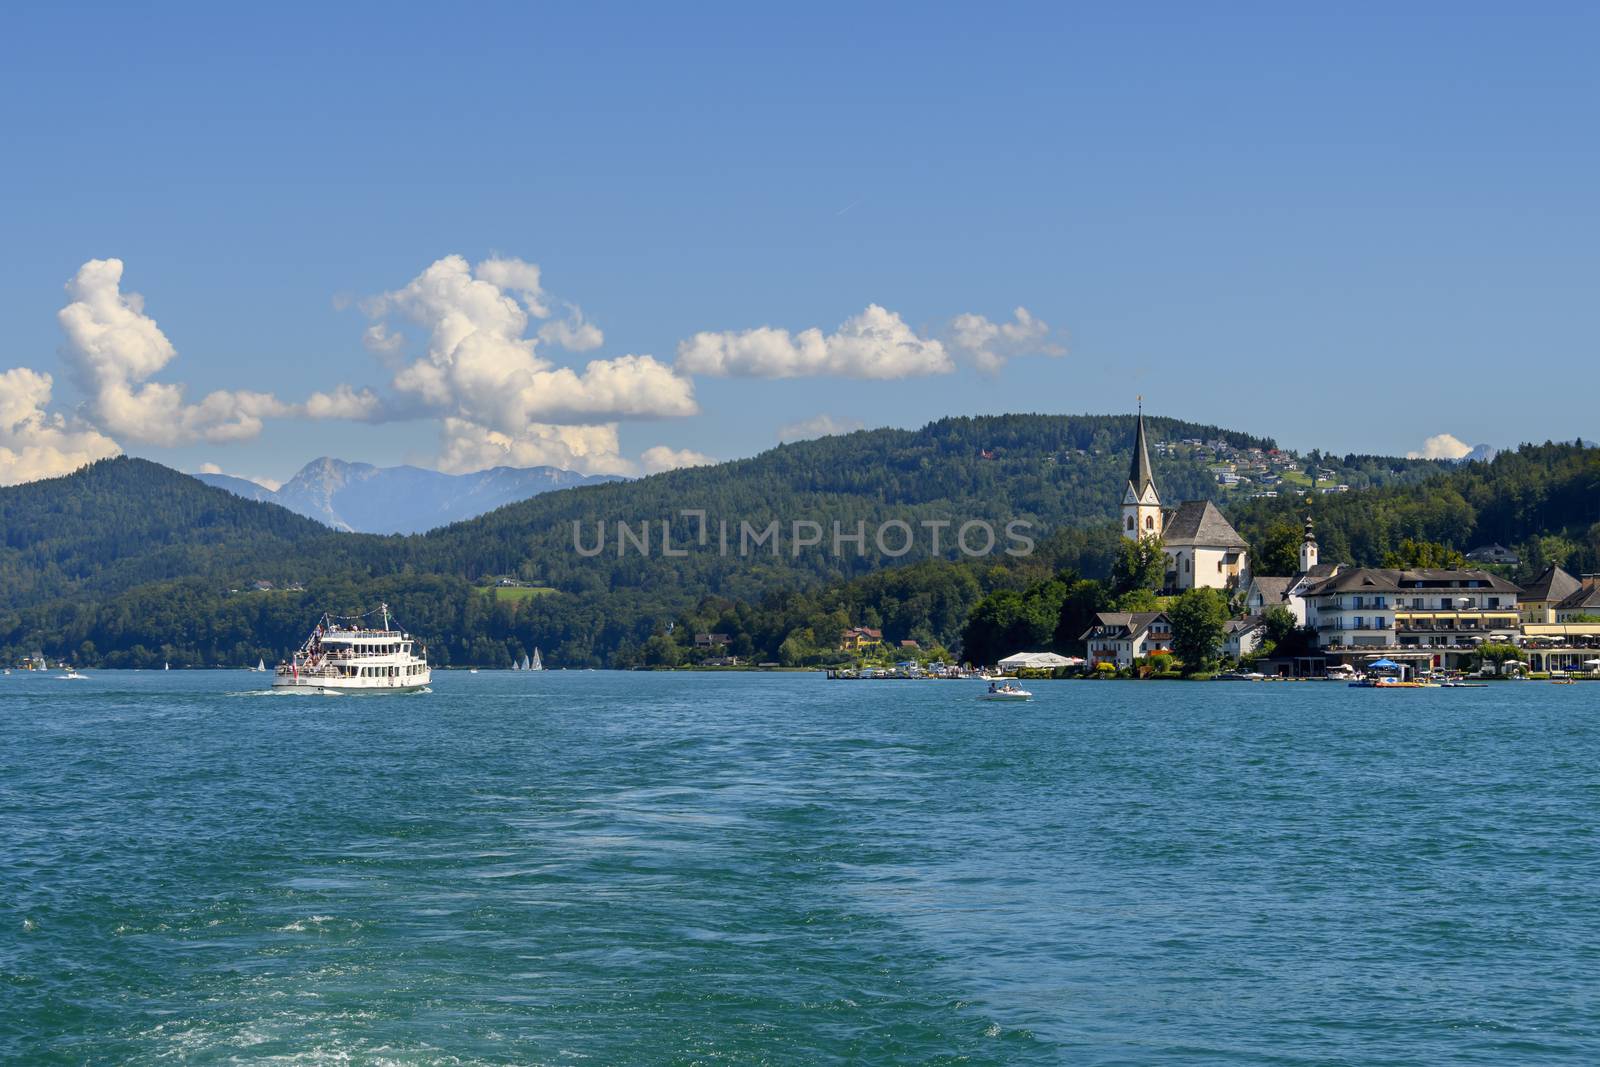 Maria Worth on Worthersee in Austria by asafaric